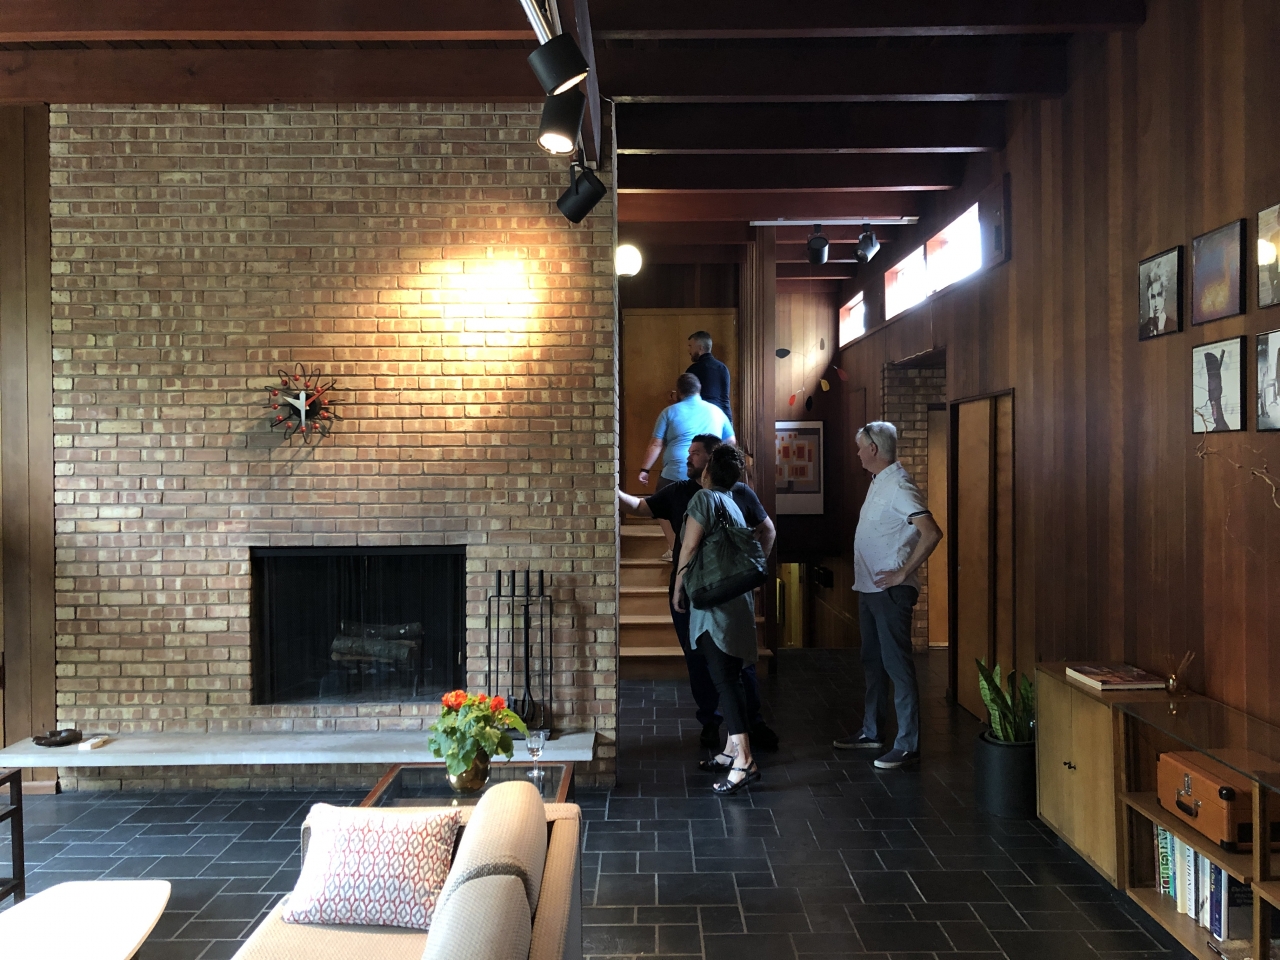 CBB visited this beautiful Keck & Keck house in Chicago Heights on August 11th, 2019